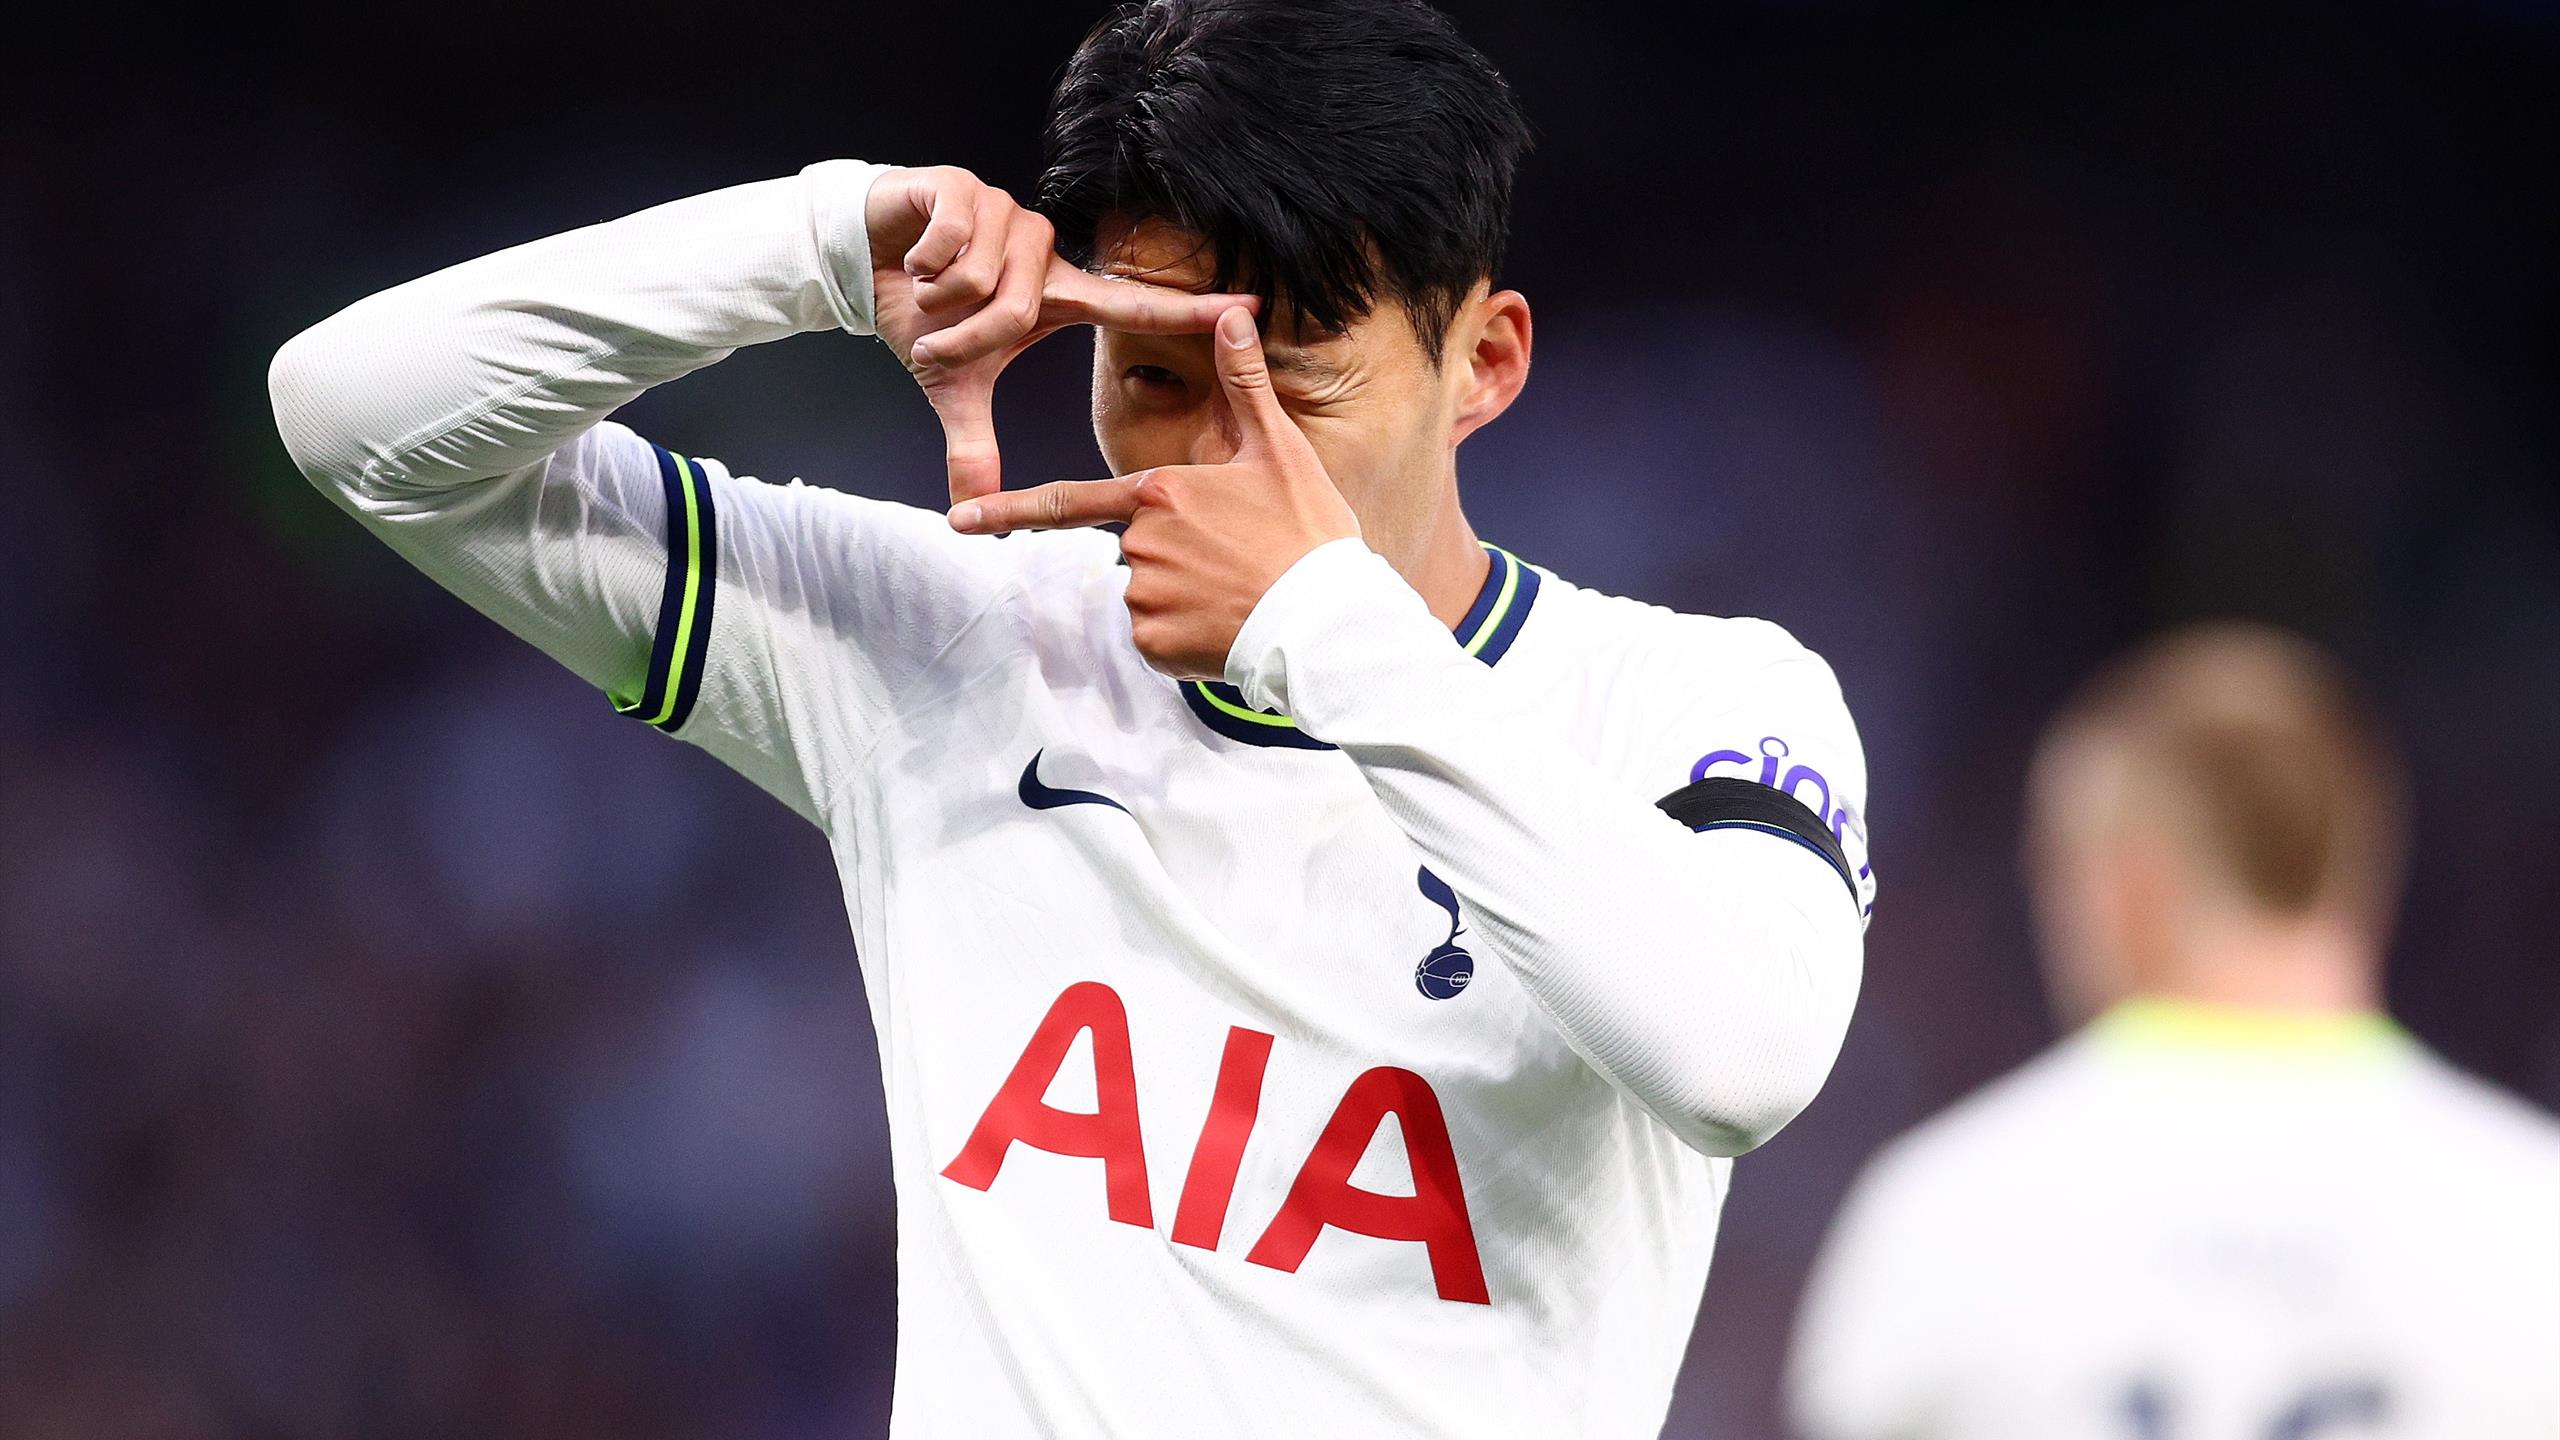 Tottenham 6 2 Leicester City: Super Sub Son Heung Min Bags Treble As Pressure Mounts On Brendan Rodgers